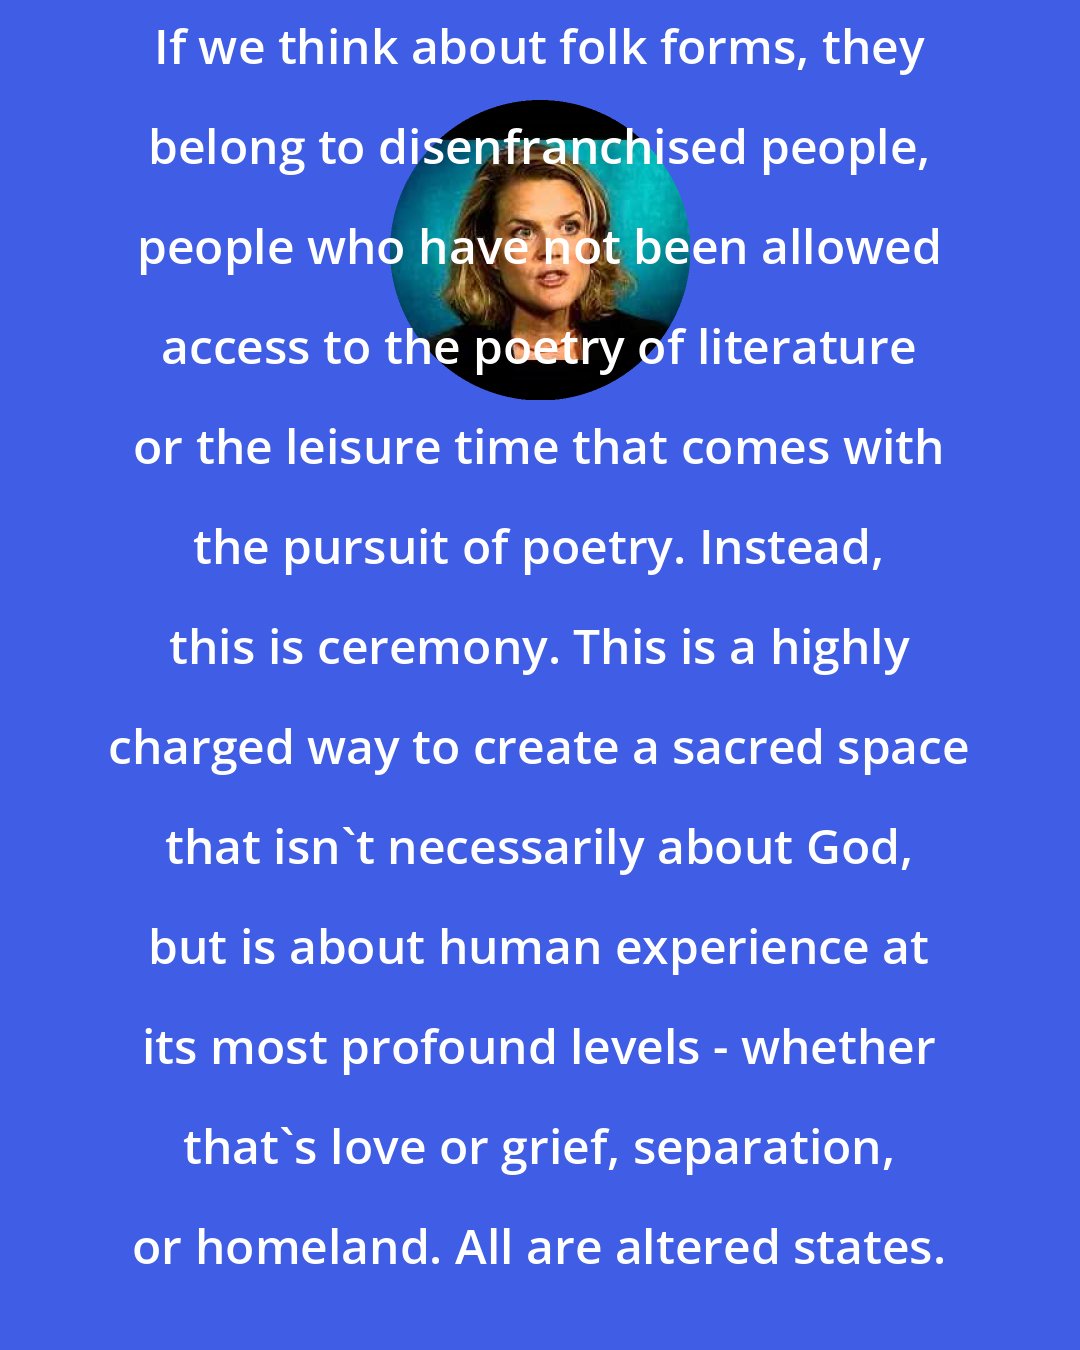 Eliza Griswold: If we think about folk forms, they belong to disenfranchised people, people who have not been allowed access to the poetry of literature or the leisure time that comes with the pursuit of poetry. Instead, this is ceremony. This is a highly charged way to create a sacred space that isn't necessarily about God, but is about human experience at its most profound levels - whether that's love or grief, separation, or homeland. All are altered states.